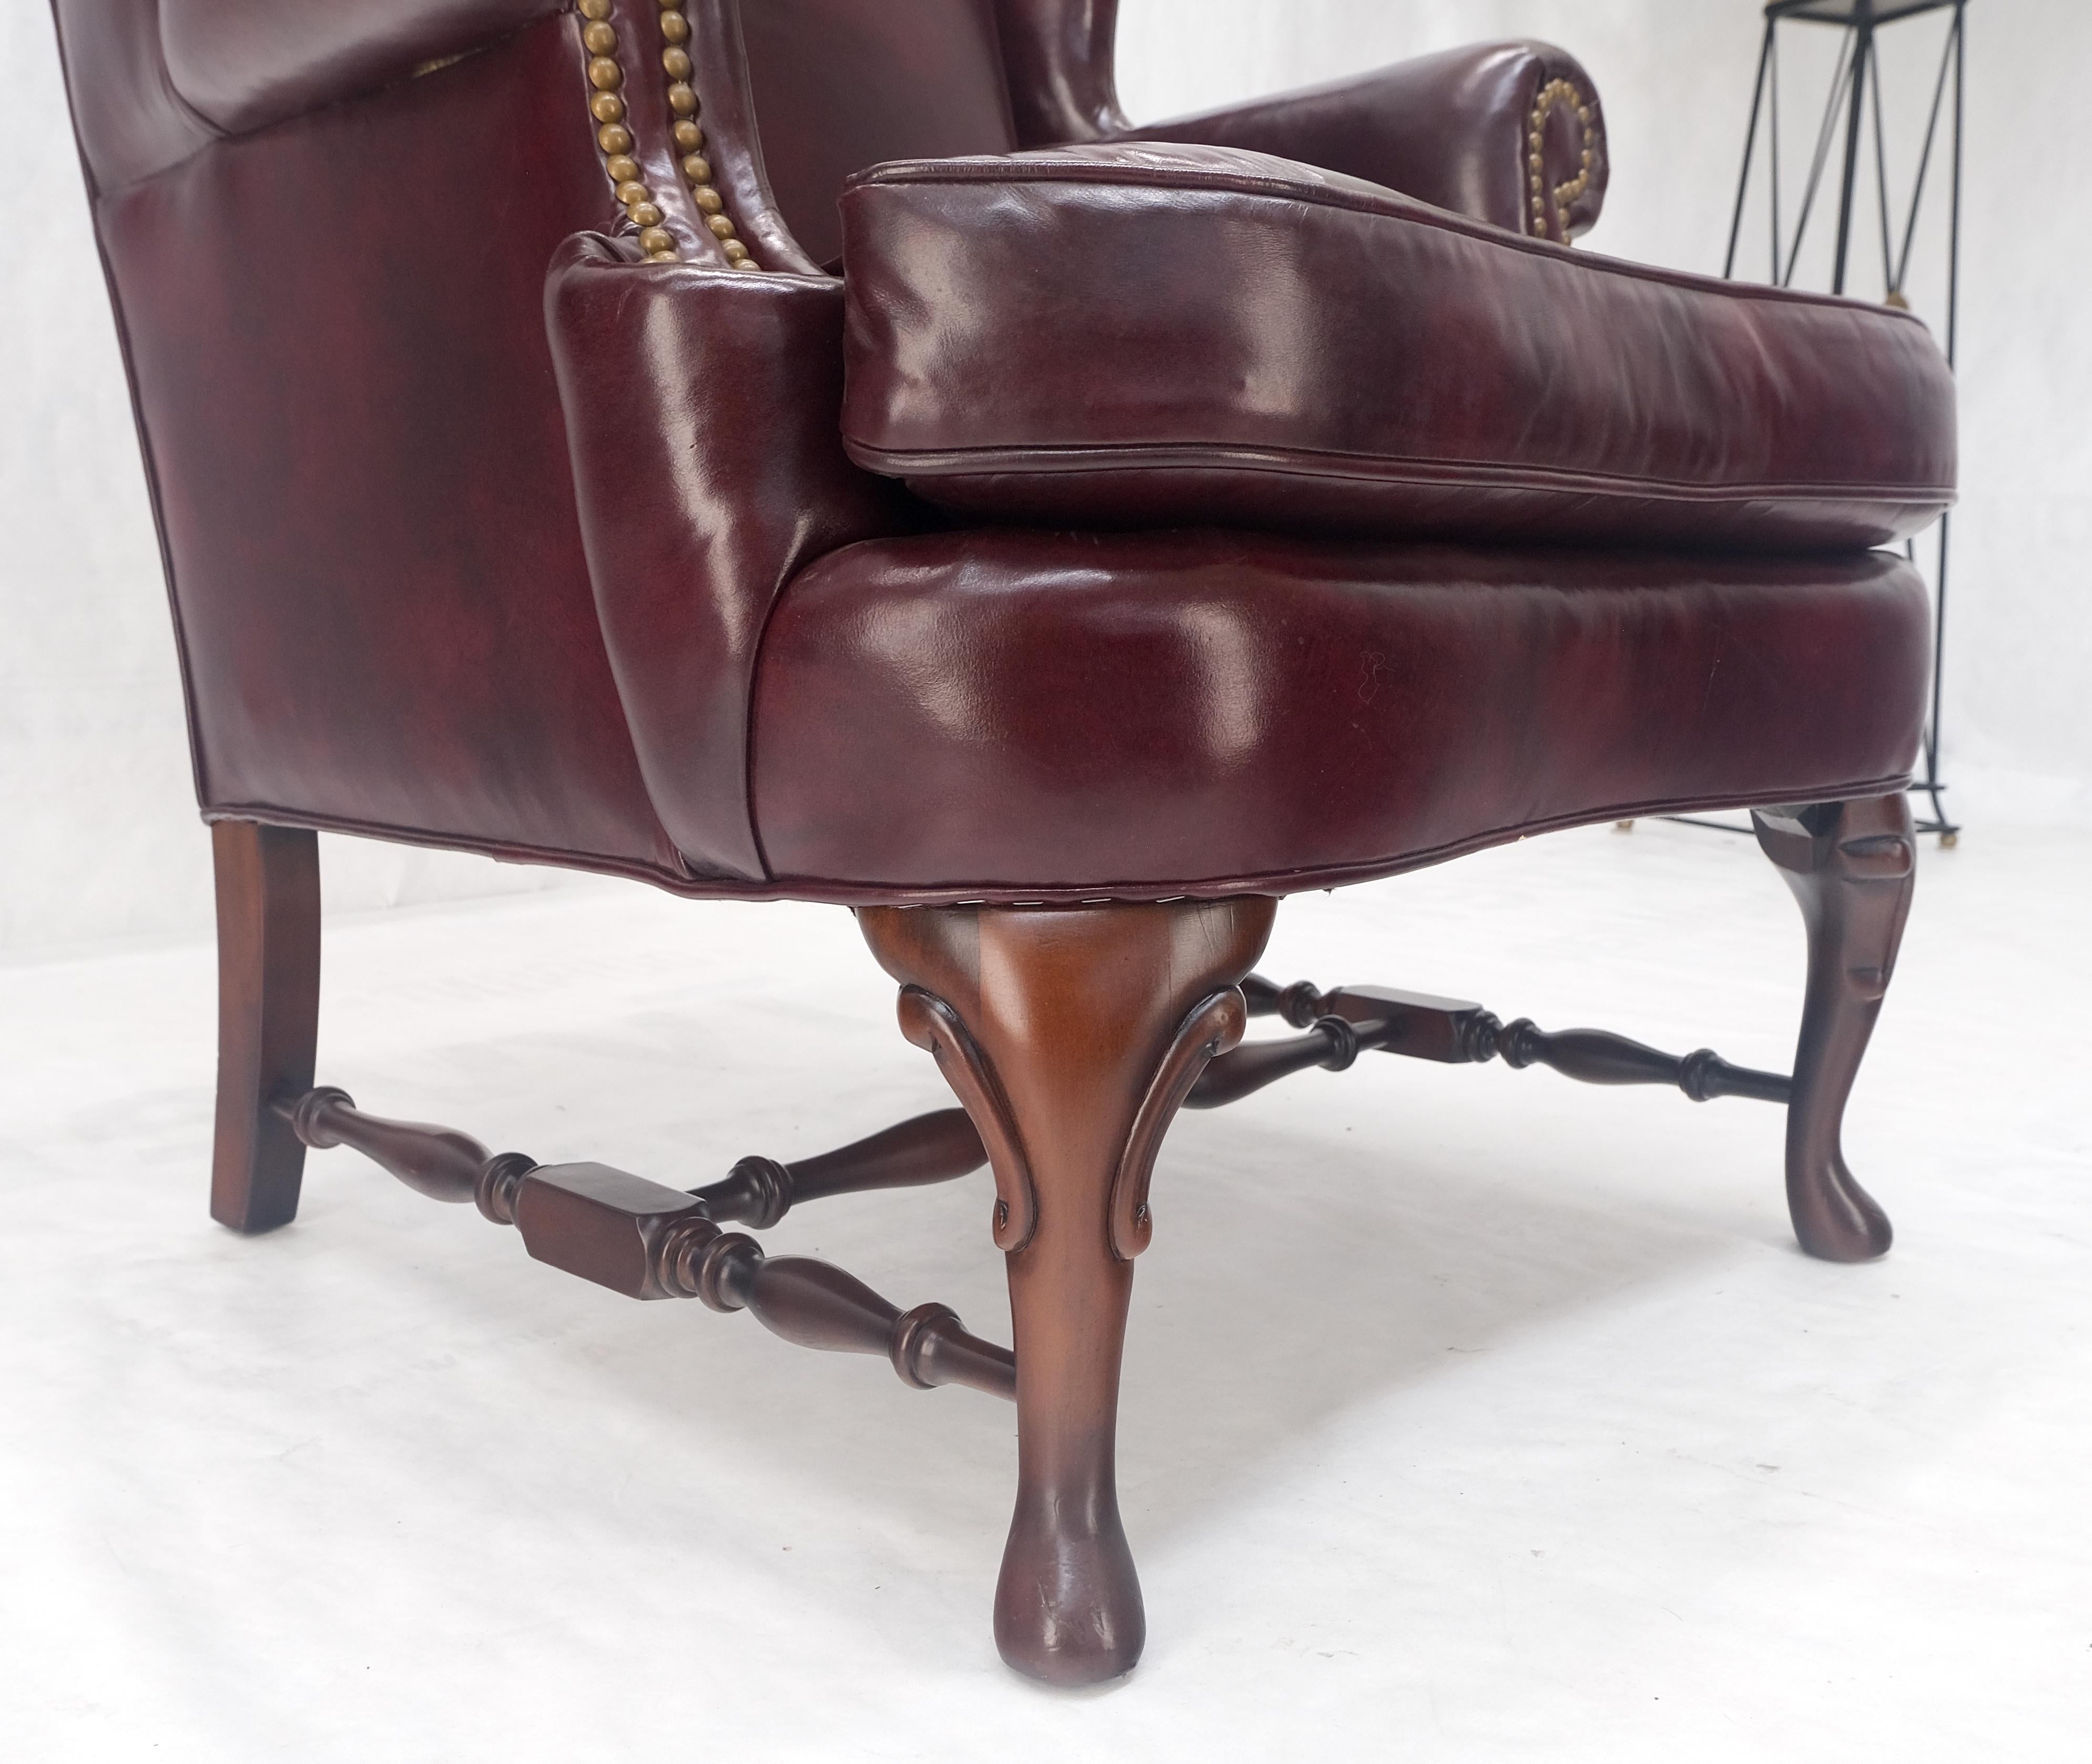 Kindel Burgundy Leather Upholstery Carved Mahogany Legs Wingback Chair & Ottoman en vente 7